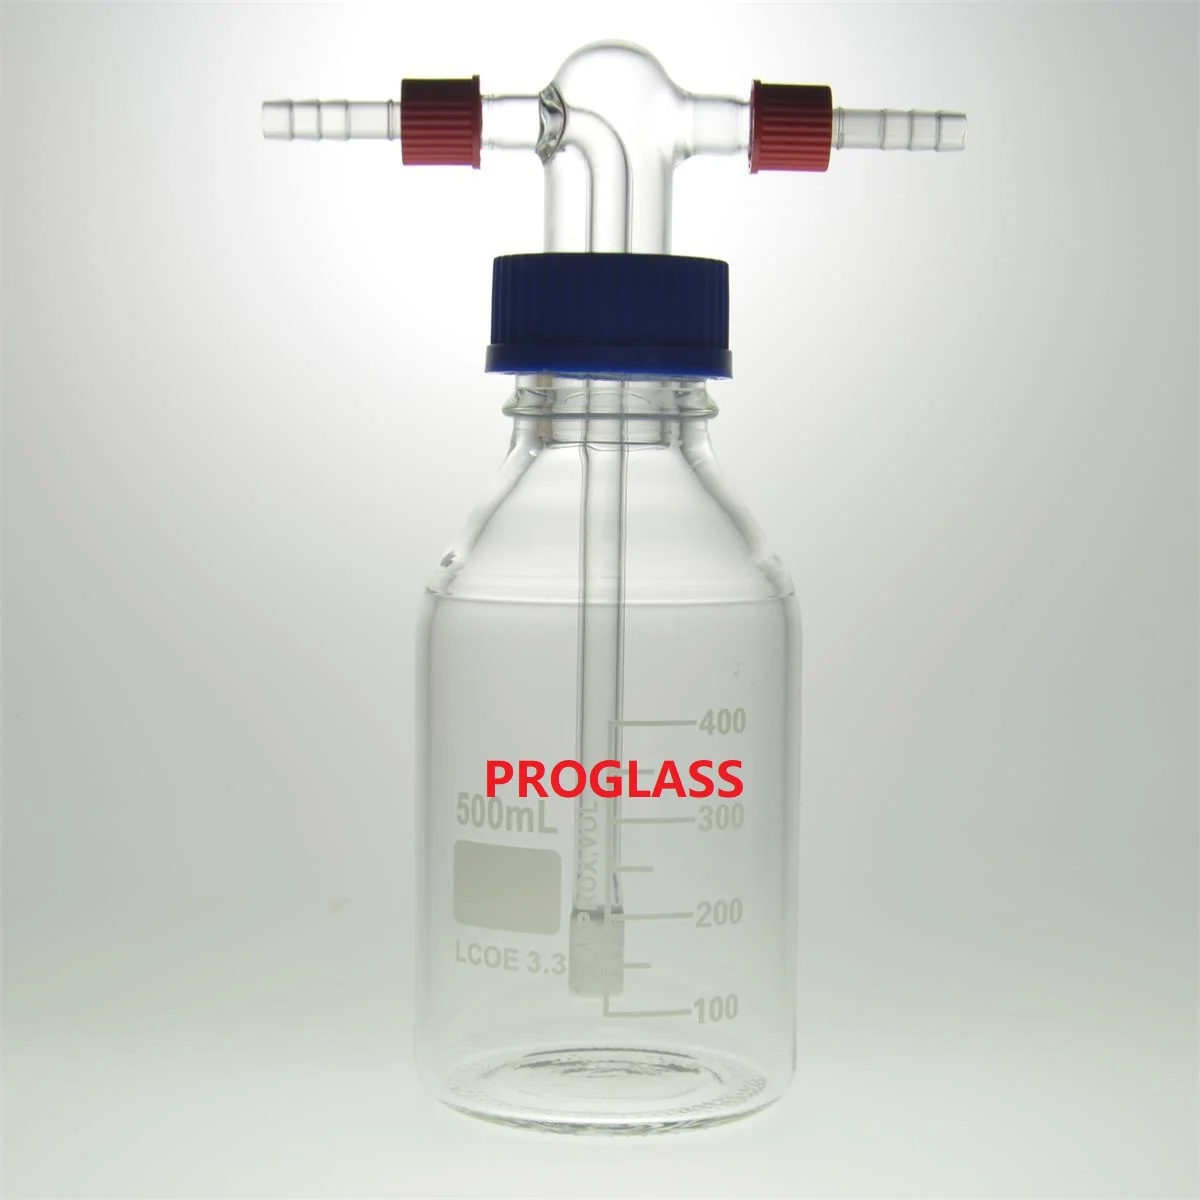 Laboratory New Washing Bottles with Removable Hose Connectors,End with the Fritted Disc G2